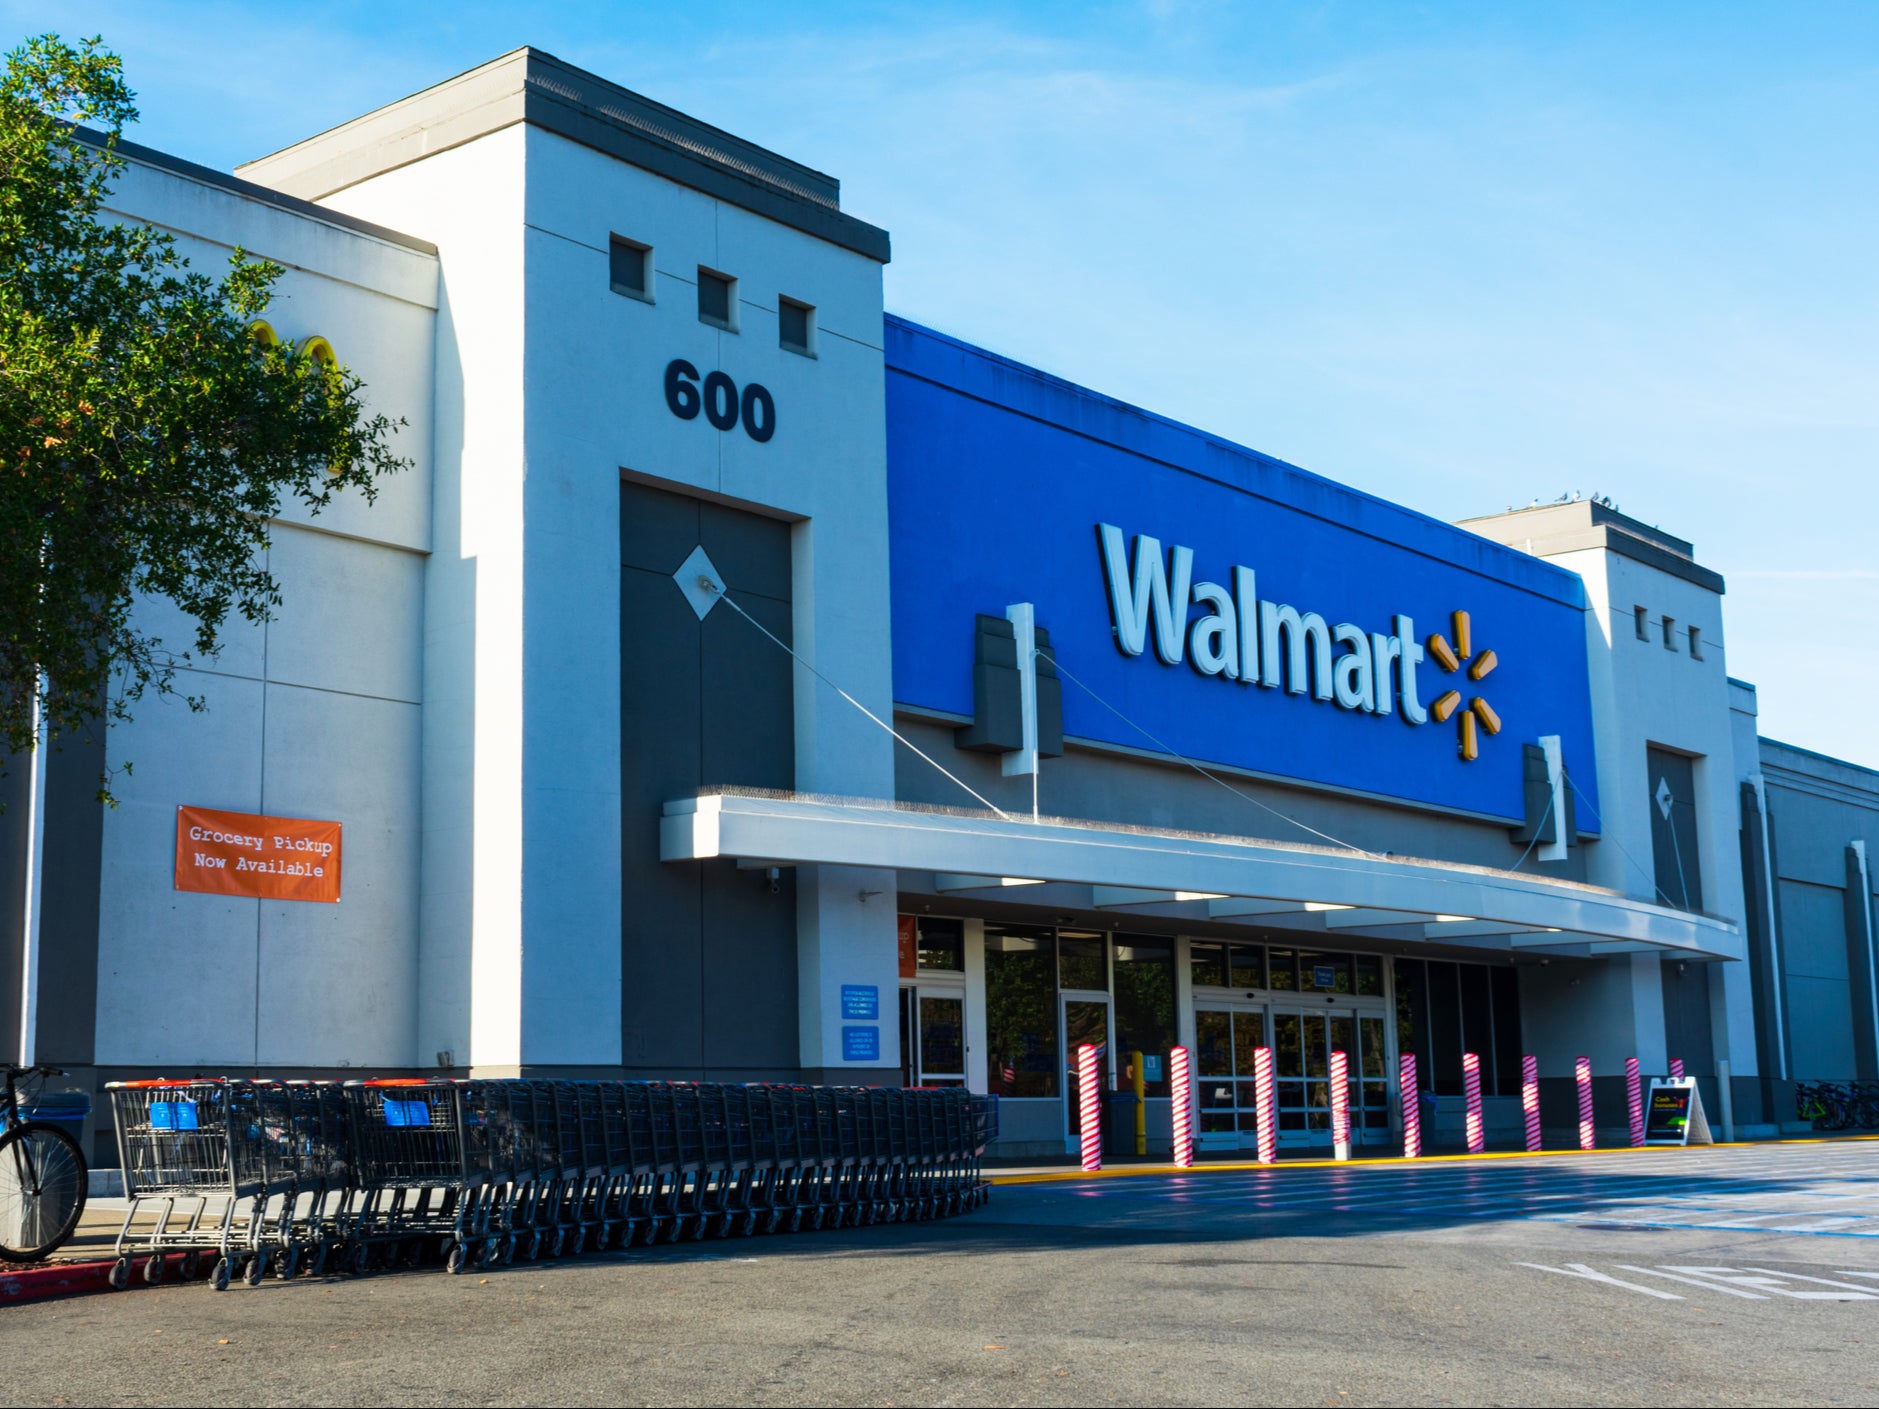 Equity & Inclusion at Walmart & Beyond